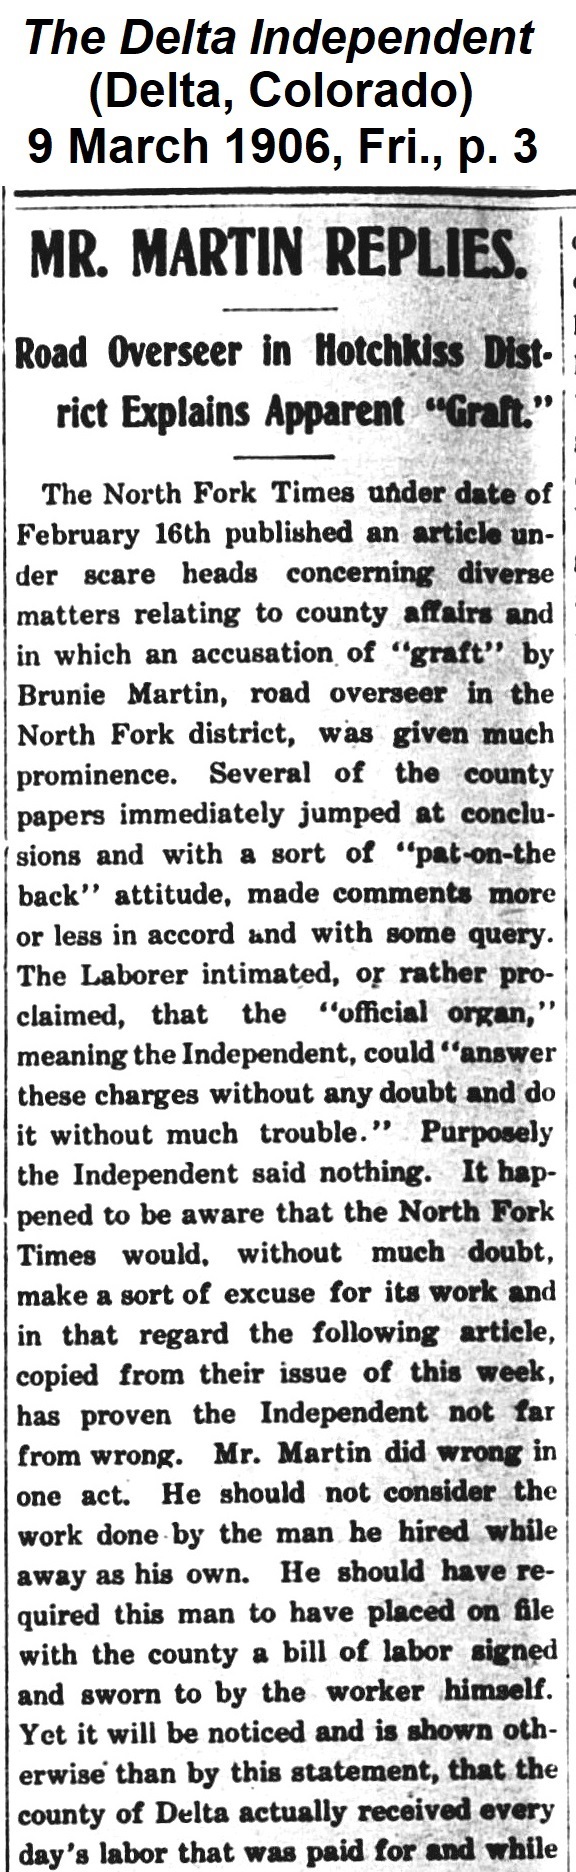 First part of article from the
                Delta Independent of 9 March 1906, titled 'Mr. Martin Replies'.